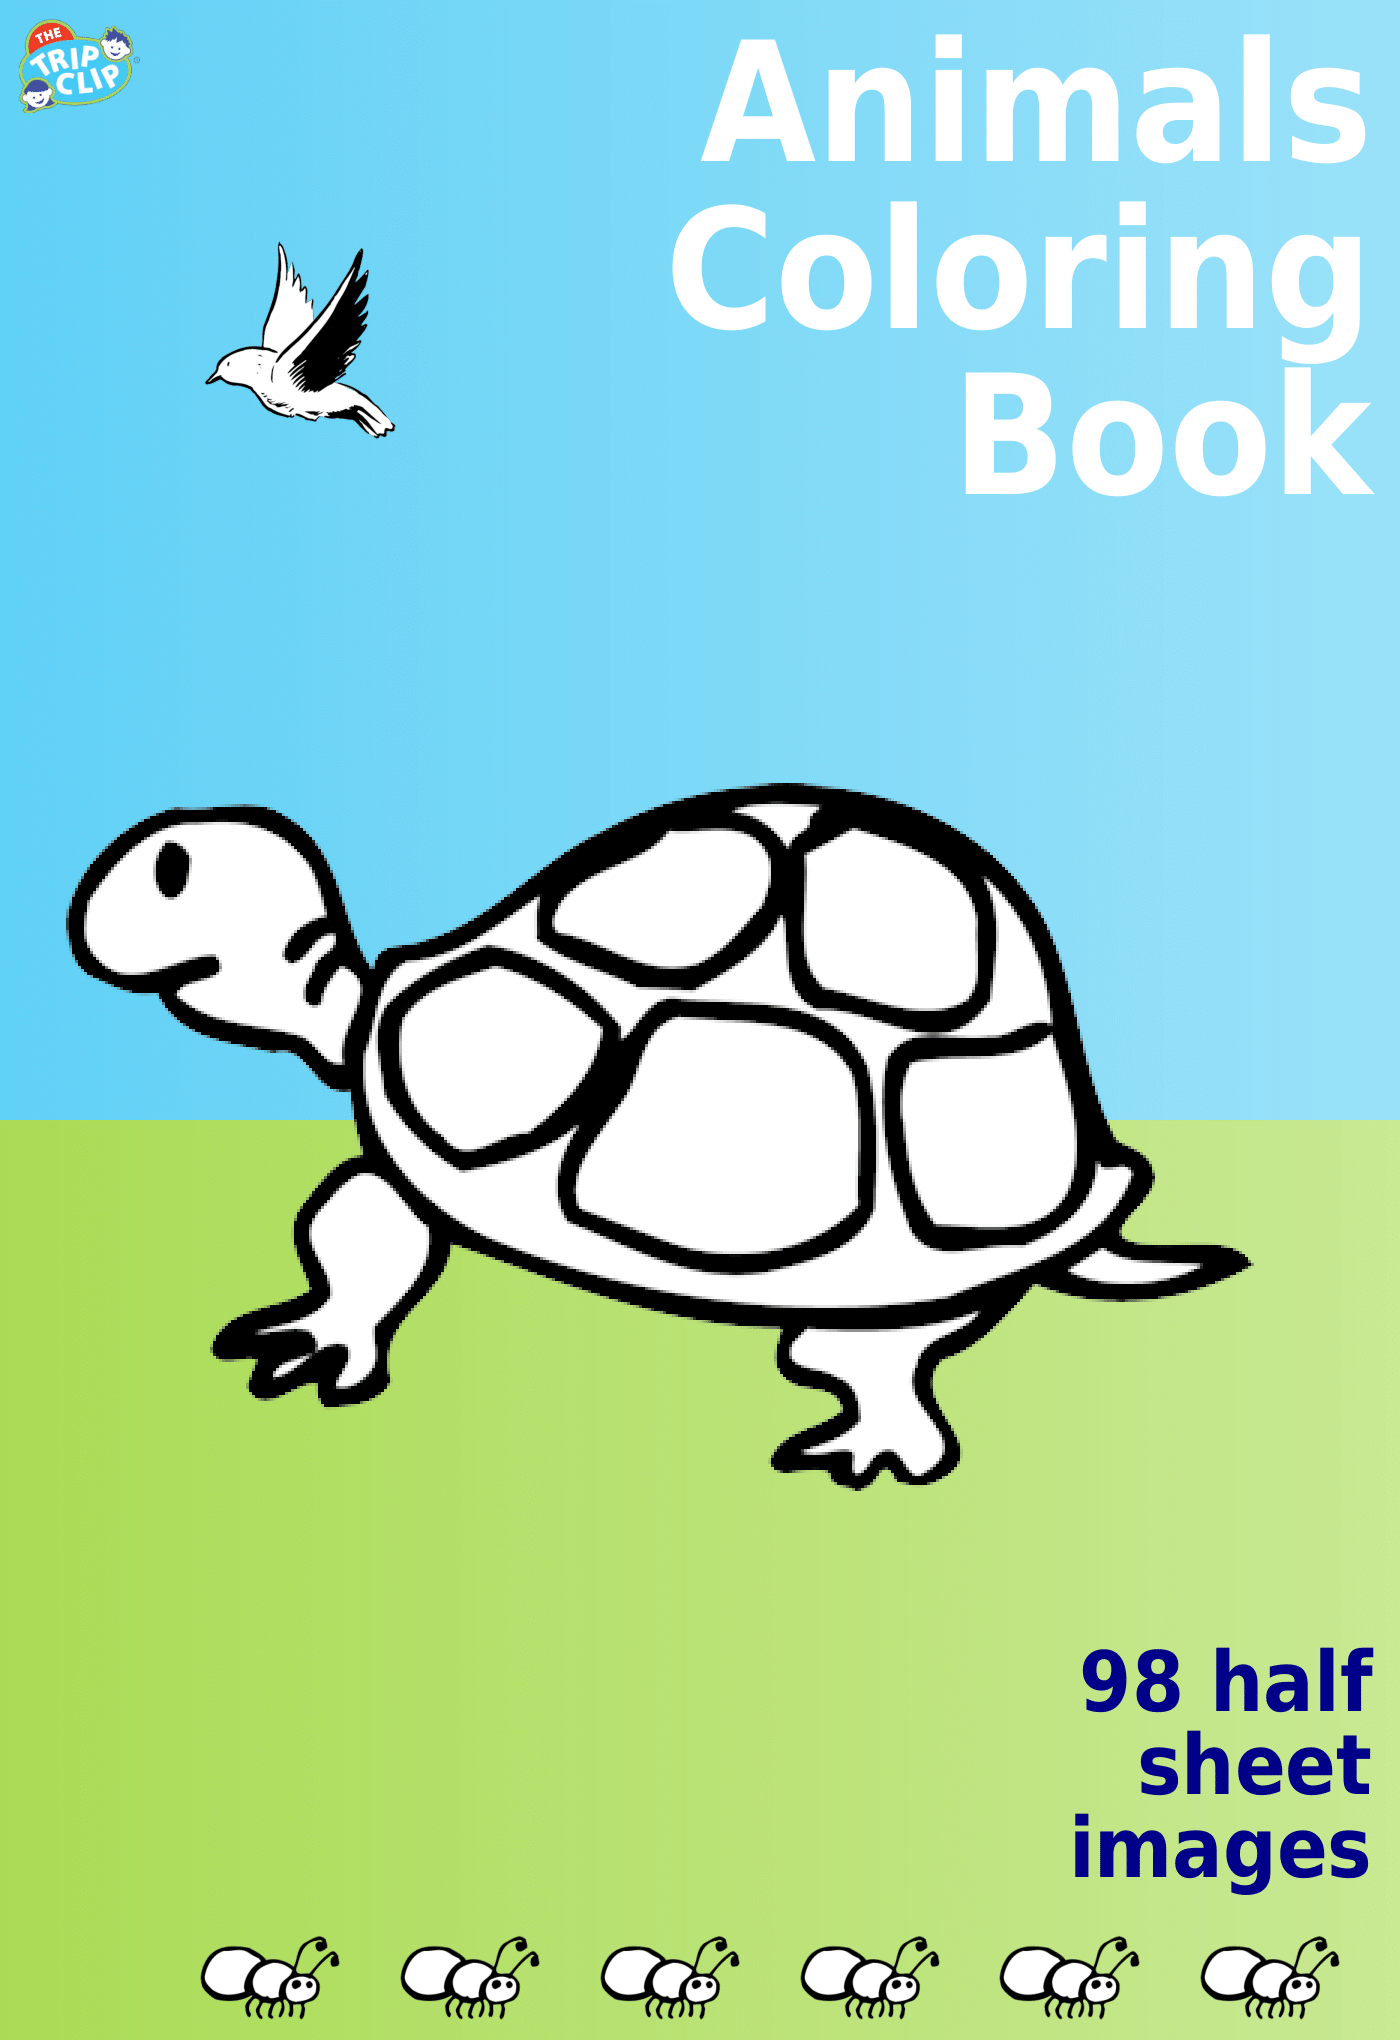 53 coloring pages, showing a turtle, a bird, and some ants